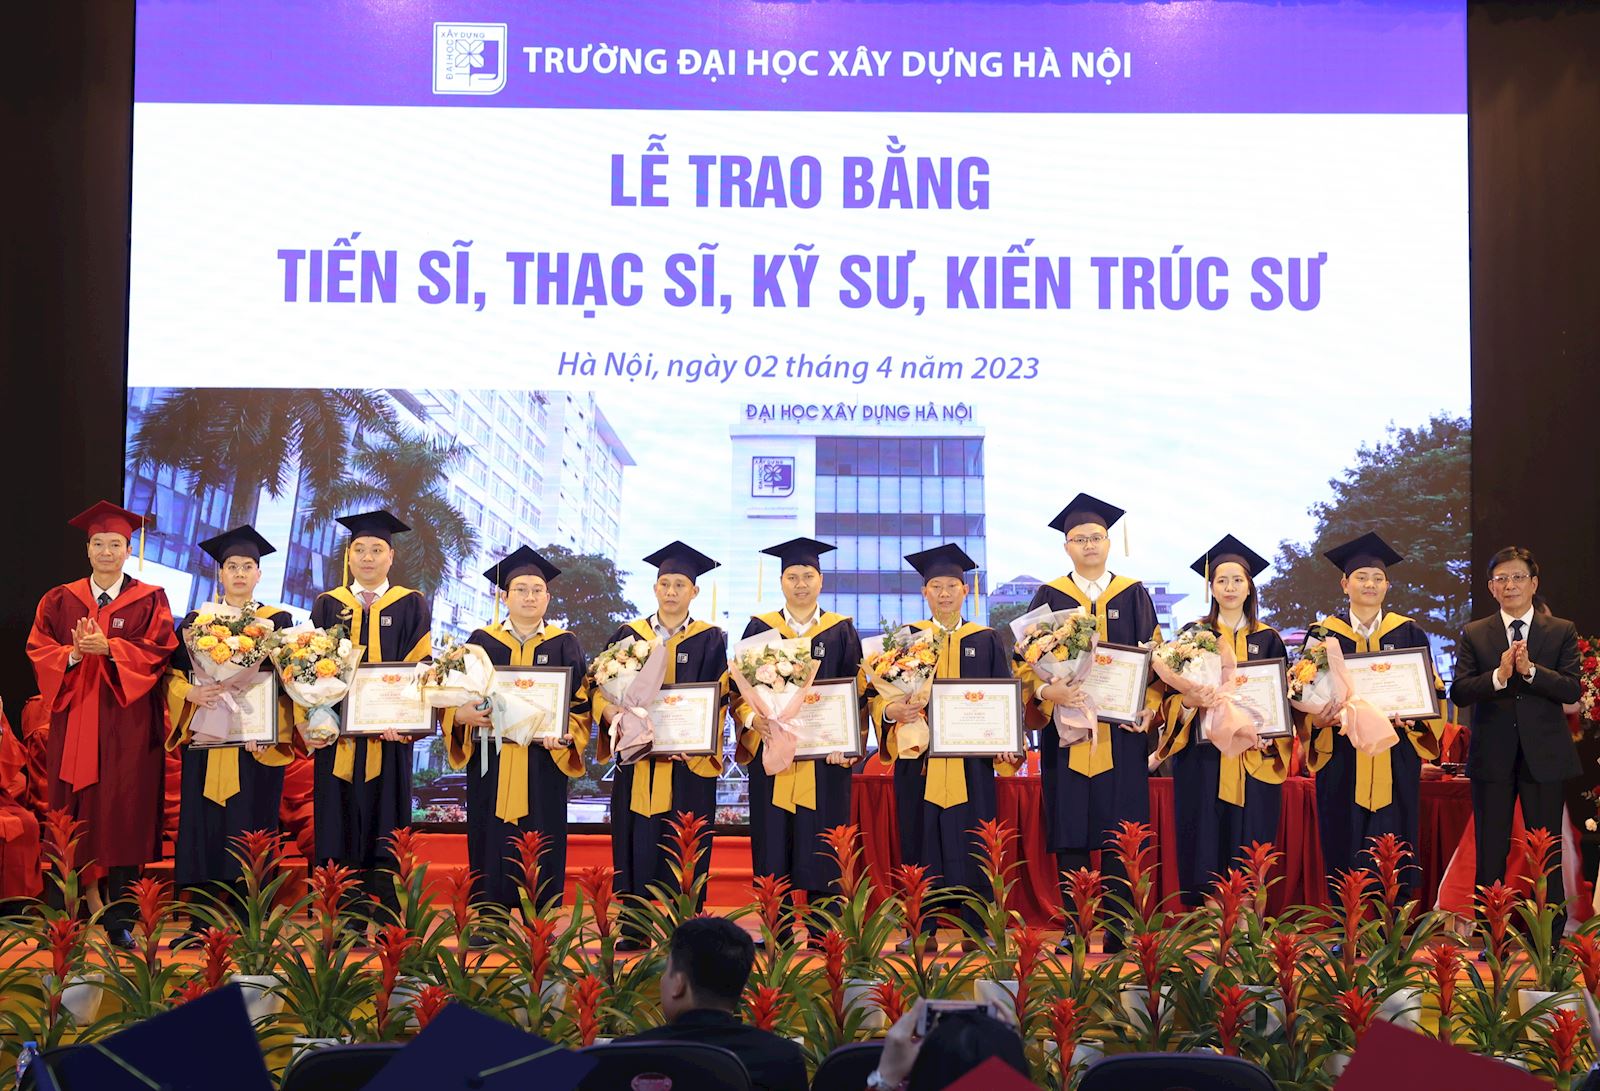 AWARDING CEREMONY OF DOCTORAL, MASTER, ENGINEER, ARCHITECT, PHASE 1 IN 2023